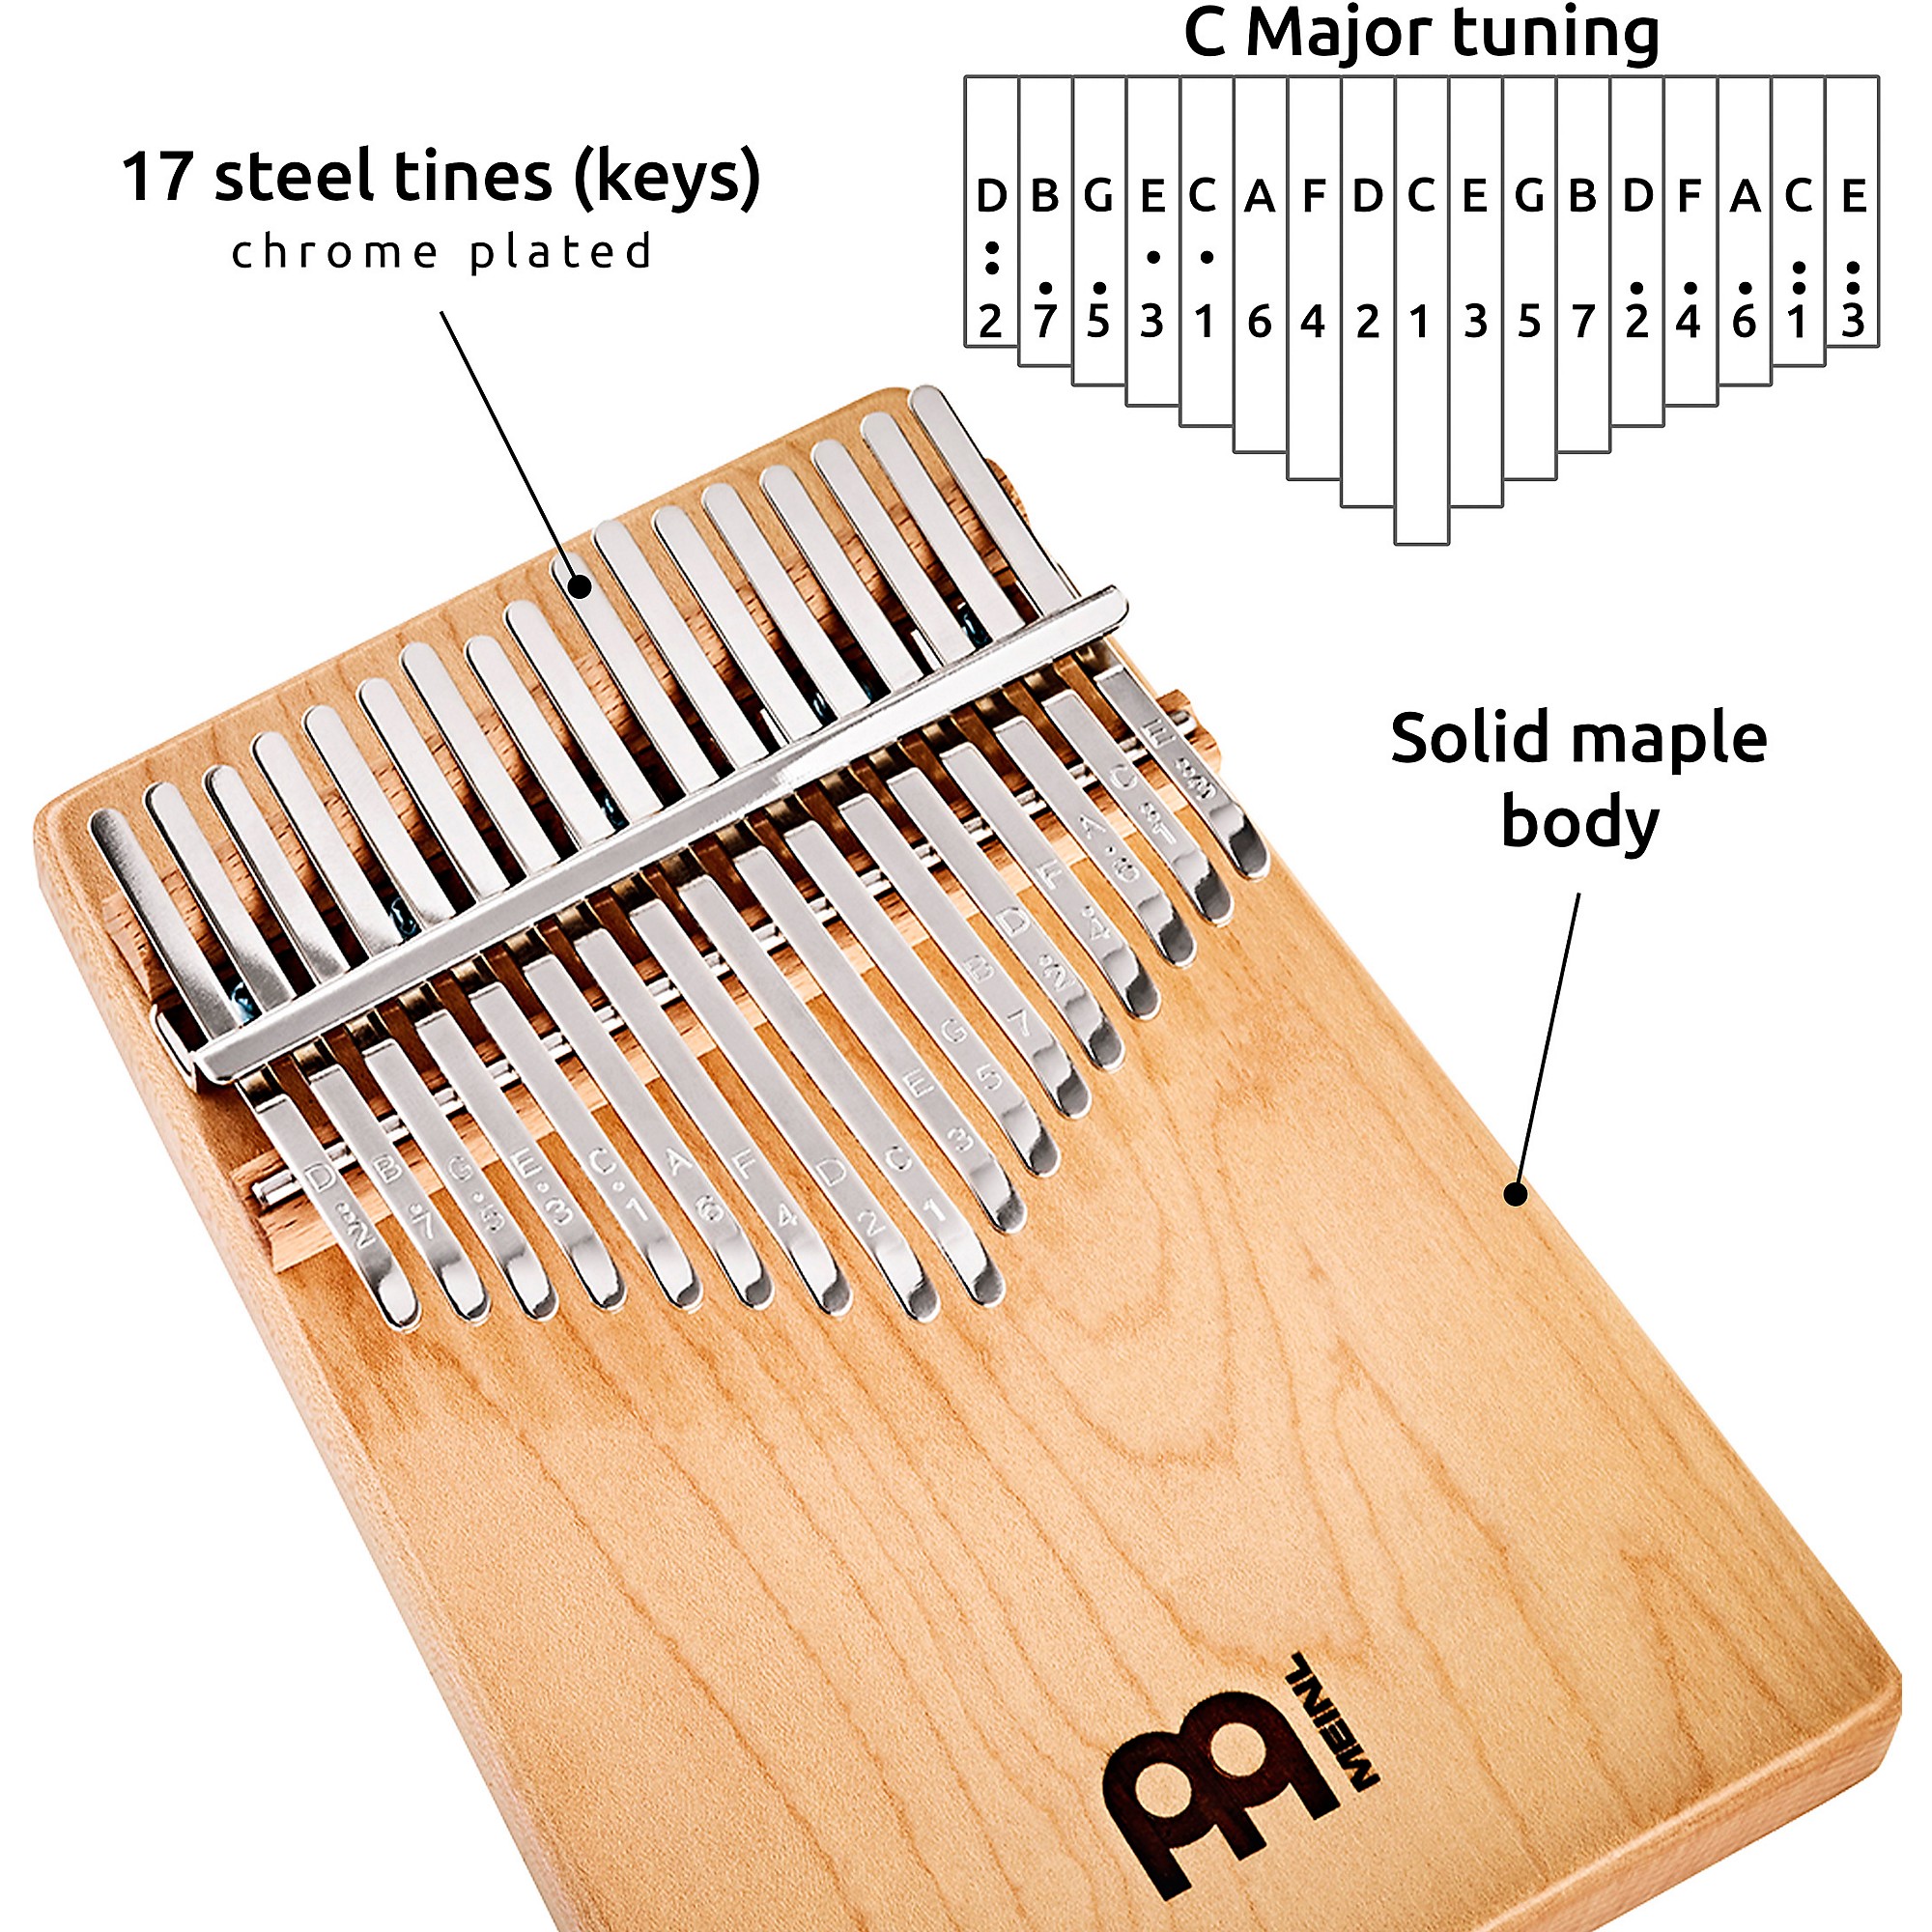 Meinl Sonic Energy Sound Solid Kalimba C-Major 8-Notes, Maple